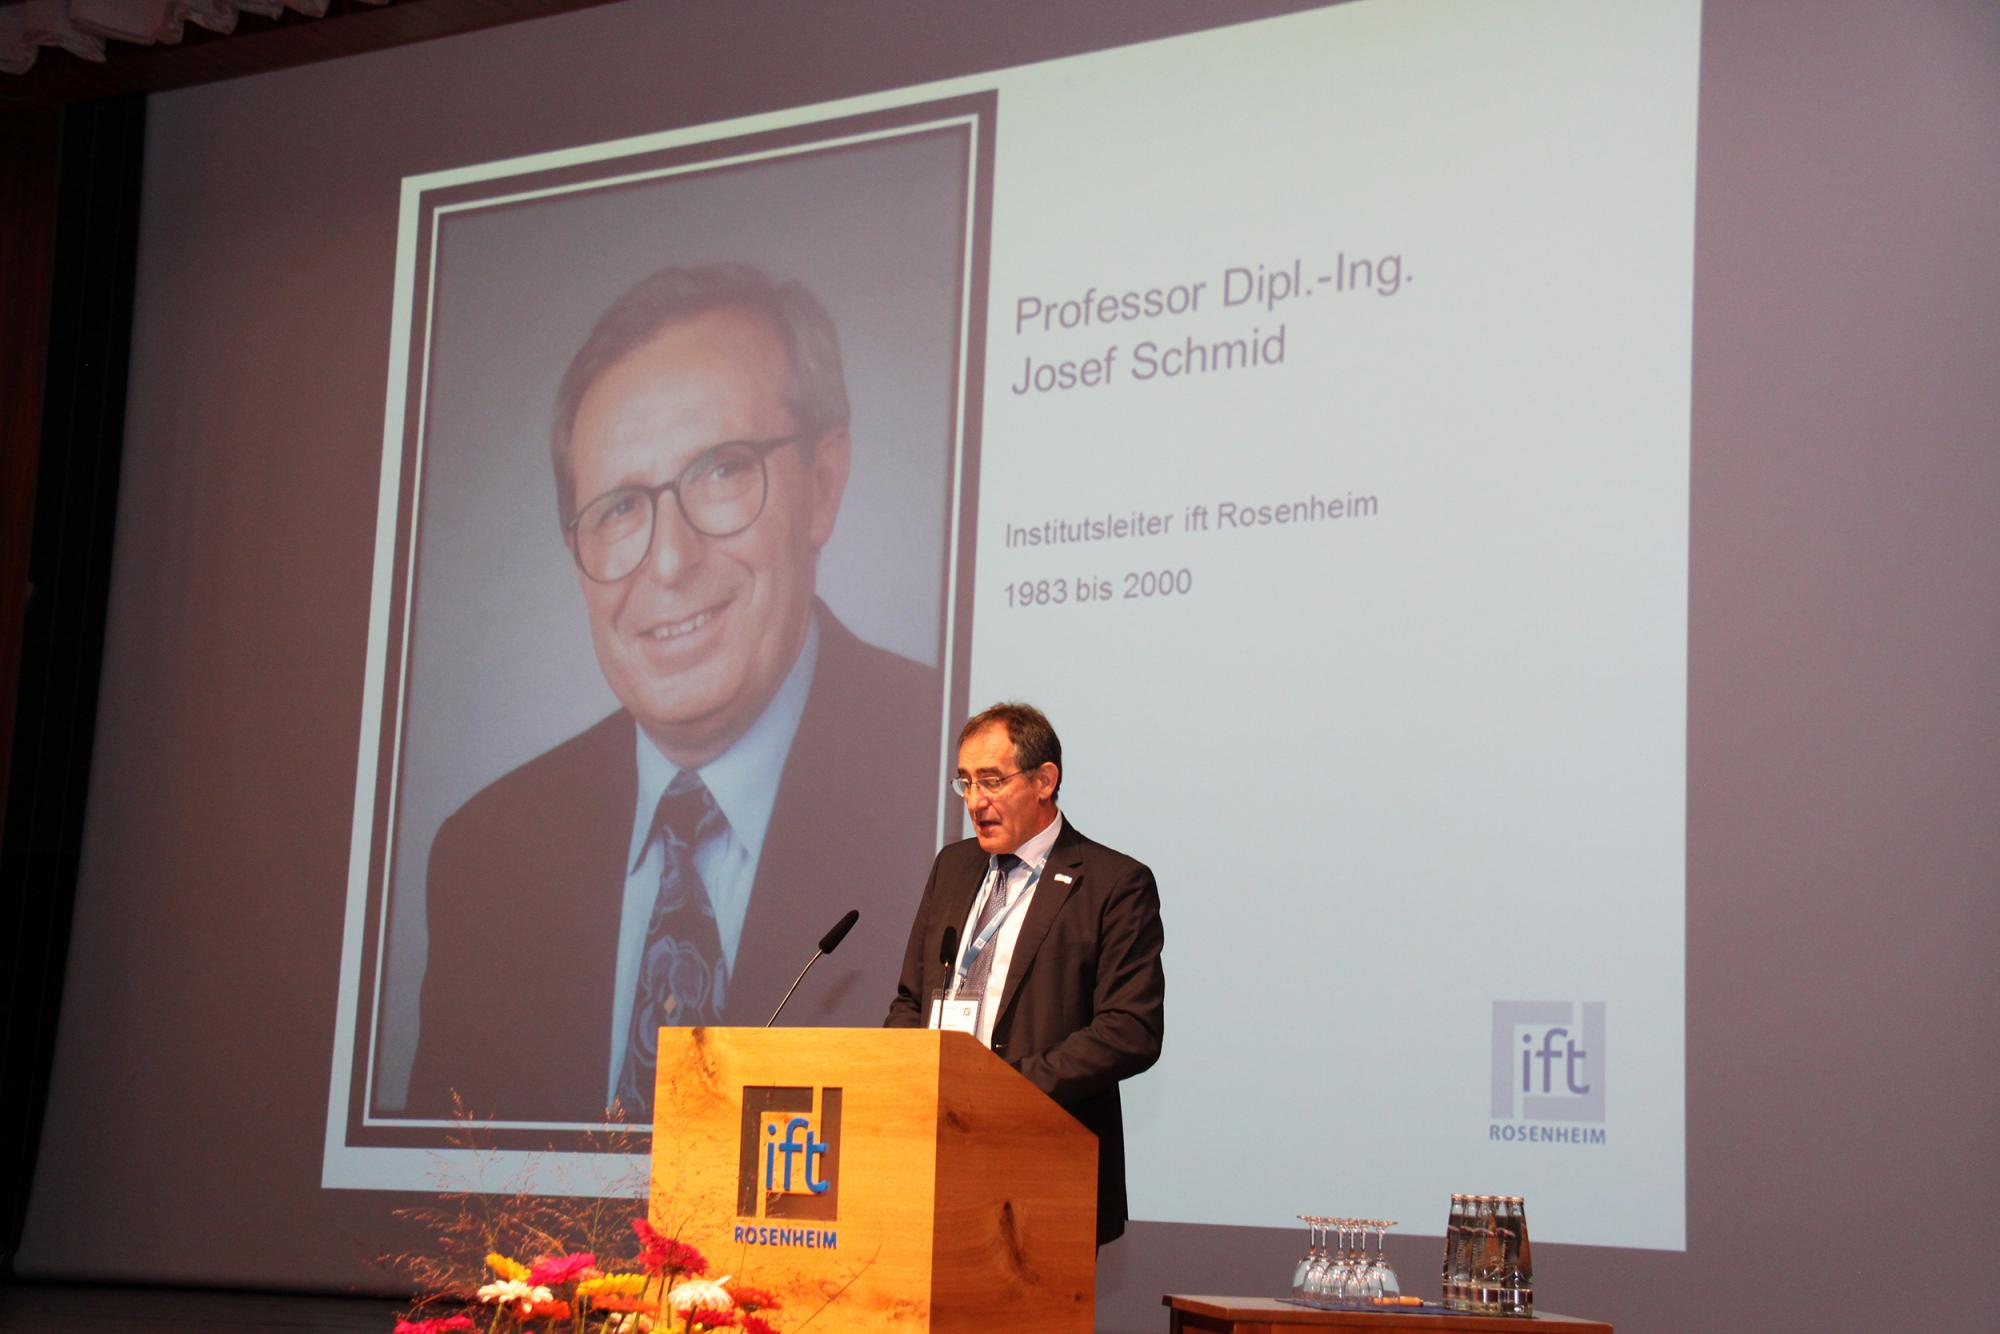      Chairman of the ift Board of Directors, Bernhard Helbing inaugurating the 44 International Rosenheim Window & Facade Conference and also remembering the Head of the Institute for a long tenure, Prof. Josef Schmid, who had passed away suddenly in September. (Source: ift Rosenheim) 